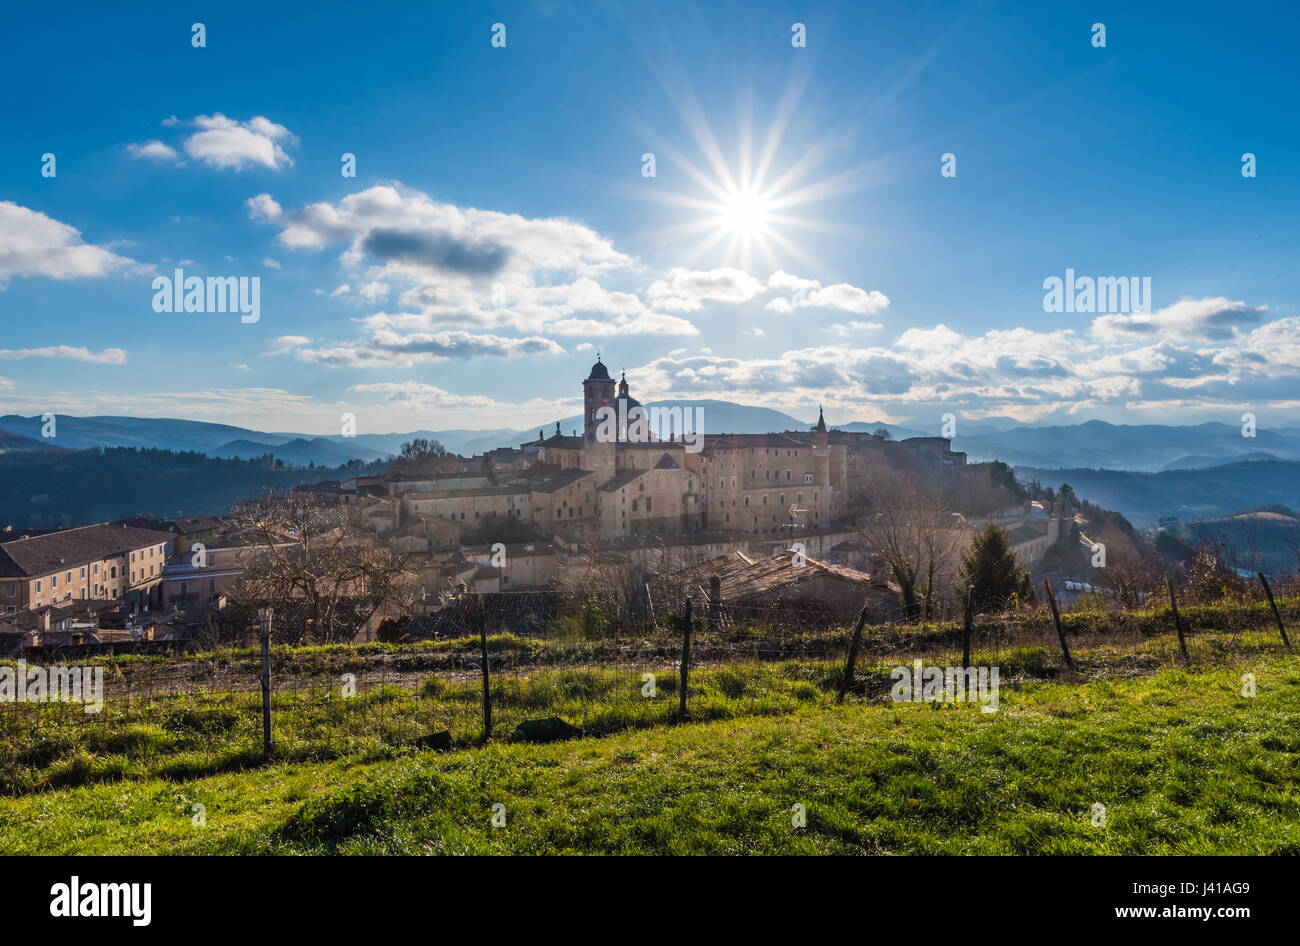 Urbino (Marche, Italy) - A walled city in the Marche region of Italy, a World Heritage Site notable for a remarkable historical legacy of Renaissance Stock Photo